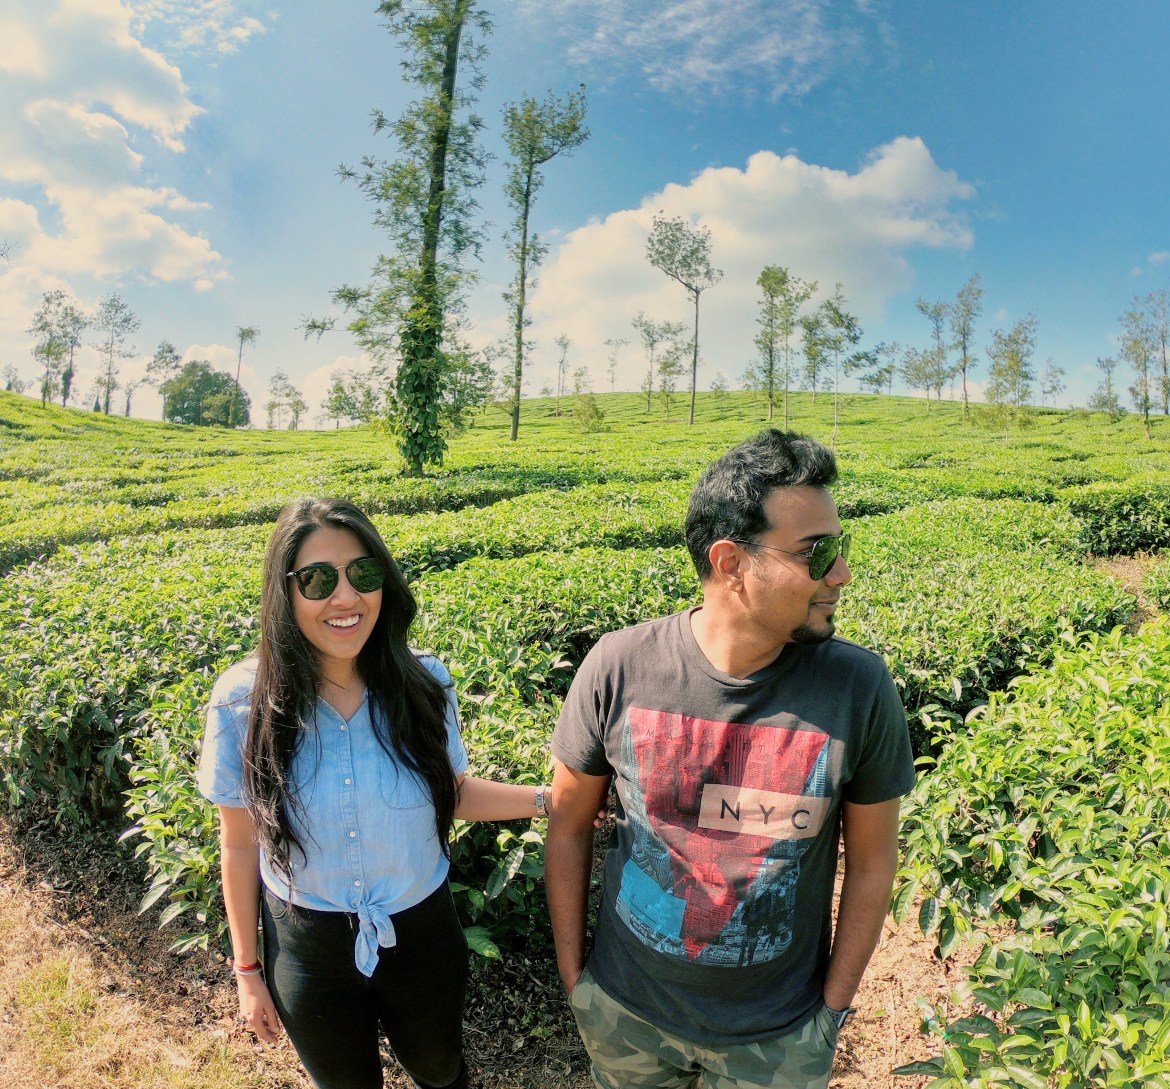 Deepti and Kishan standing together in a tea leaf field on a sunny day. Deepti is holding Kishan's arm while he looks away from the camera. 